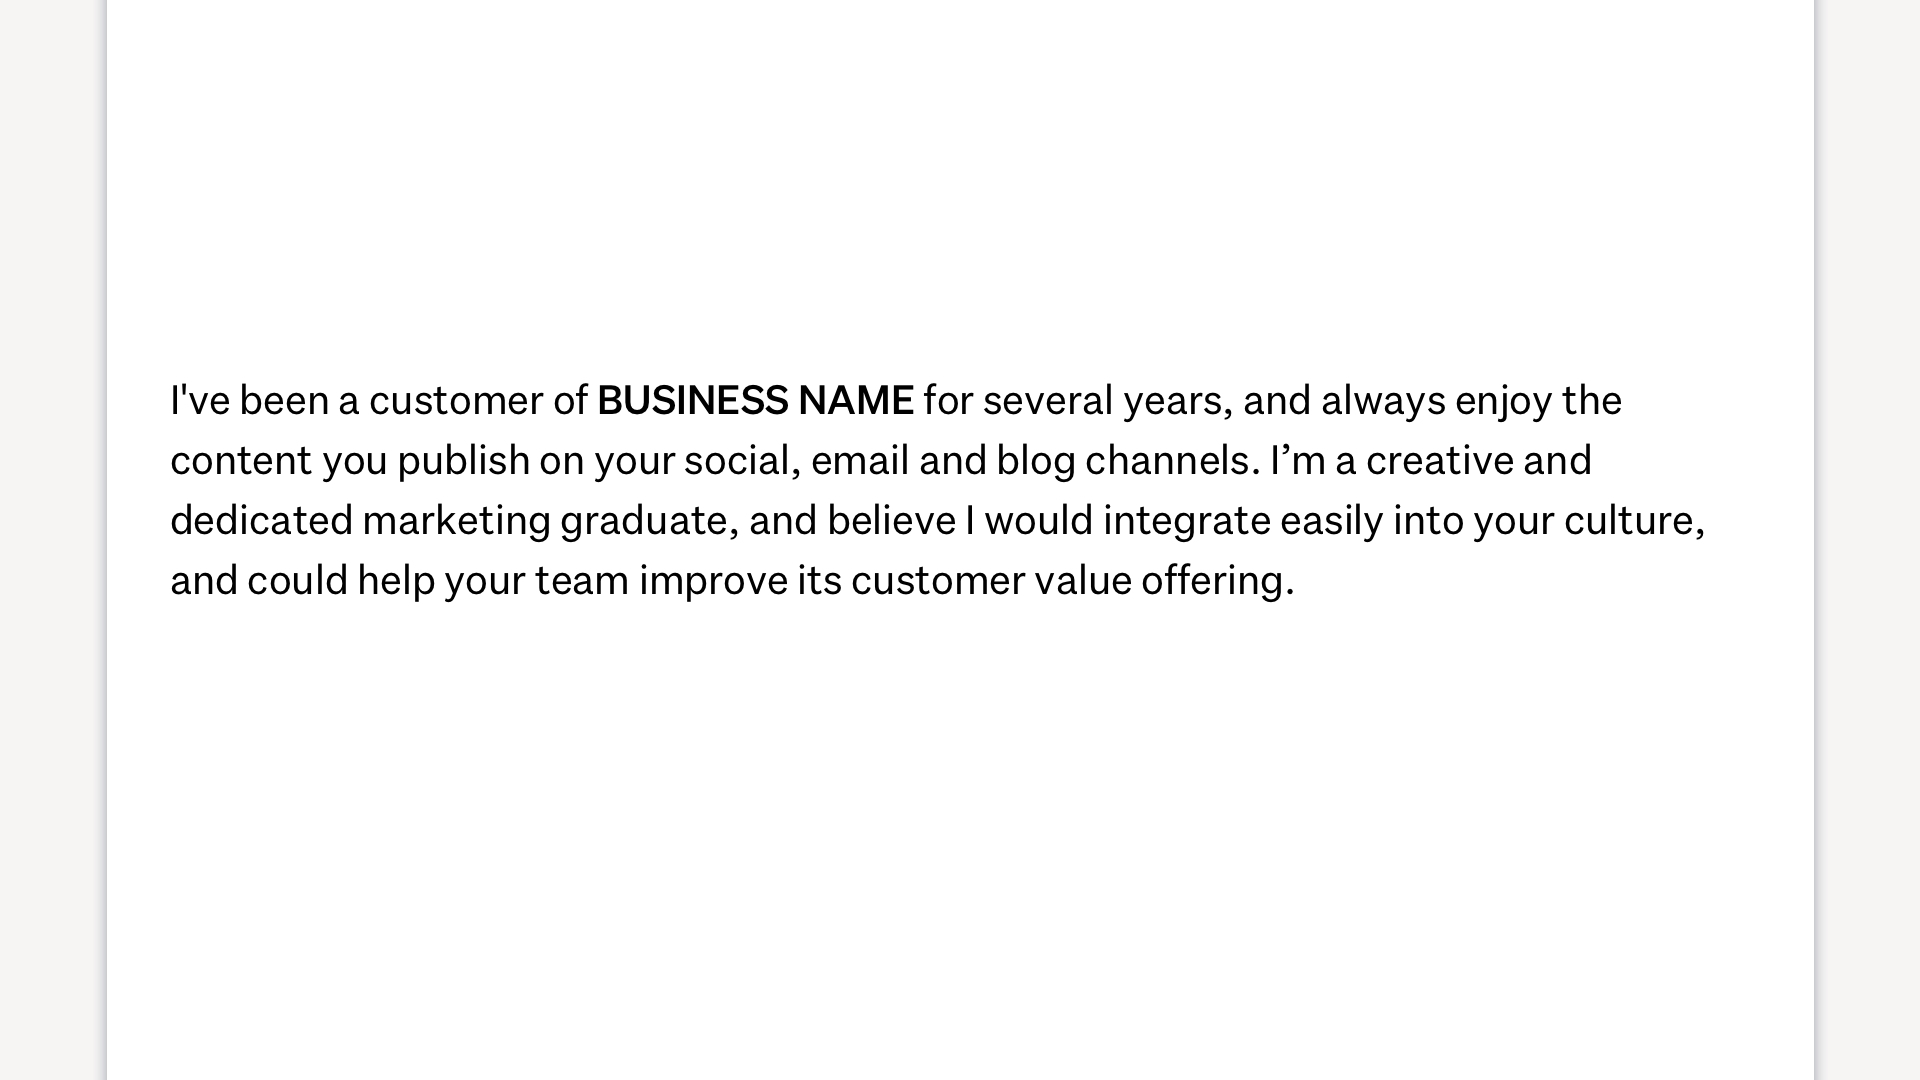 Image showing how to start a cover letter. It reads: "I've been a customer of BUSINESS NAME for several years, and always enjoy the content you publish on your social, email and blog channels. I'm a creative and dedicated marketing graduate, and believe I would integrate easily into your culture, and could help your team improve its customer value offering."